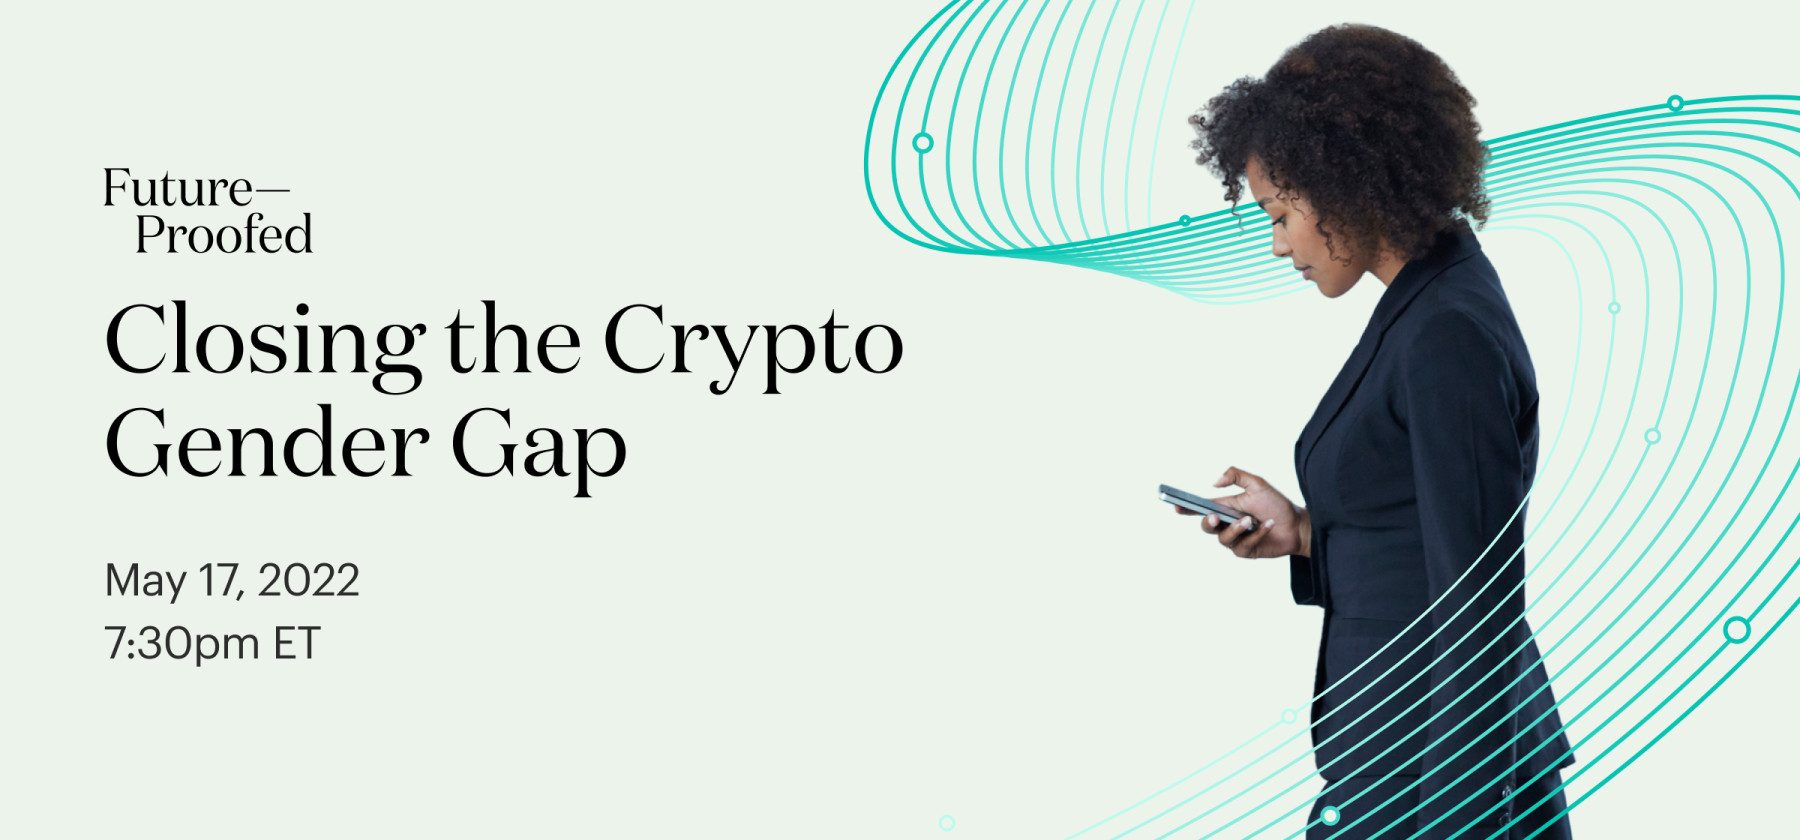 Future-Proofed Closing the Crypto Gender Gap May 17 2022 7:30pm ET